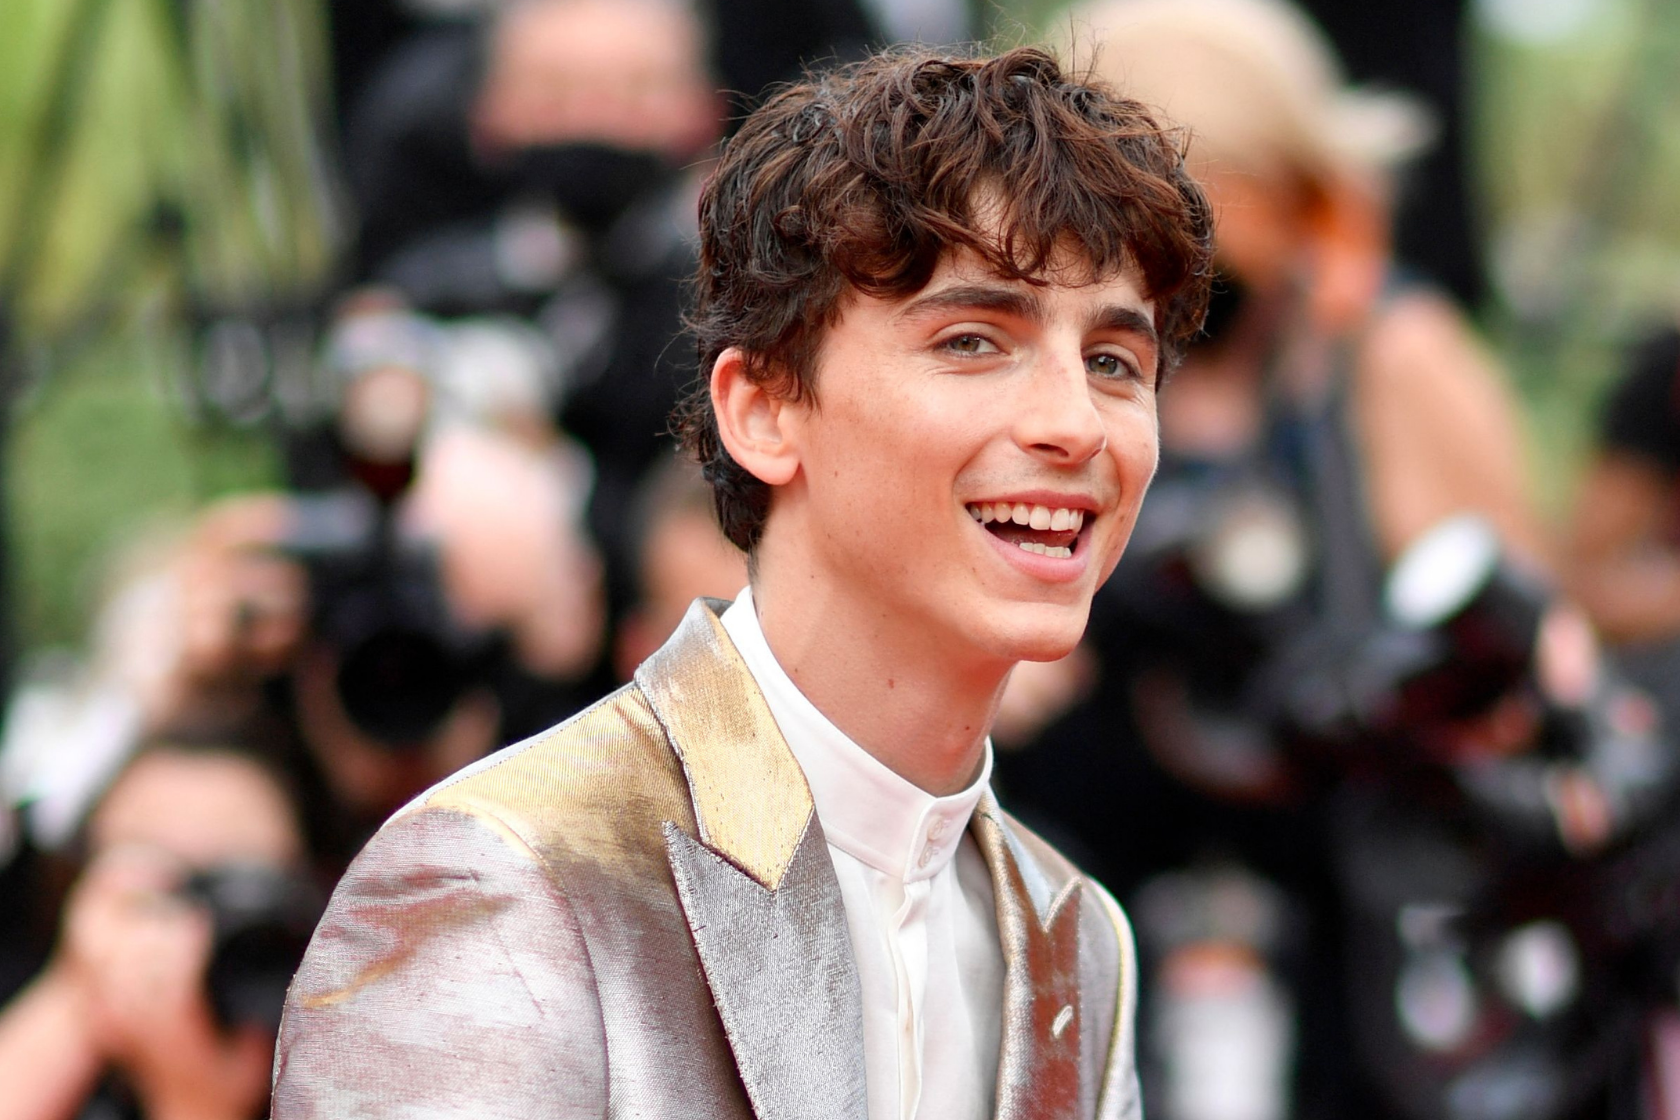 Timothée Chalamet's glowing skin at the Cannes Film Festival